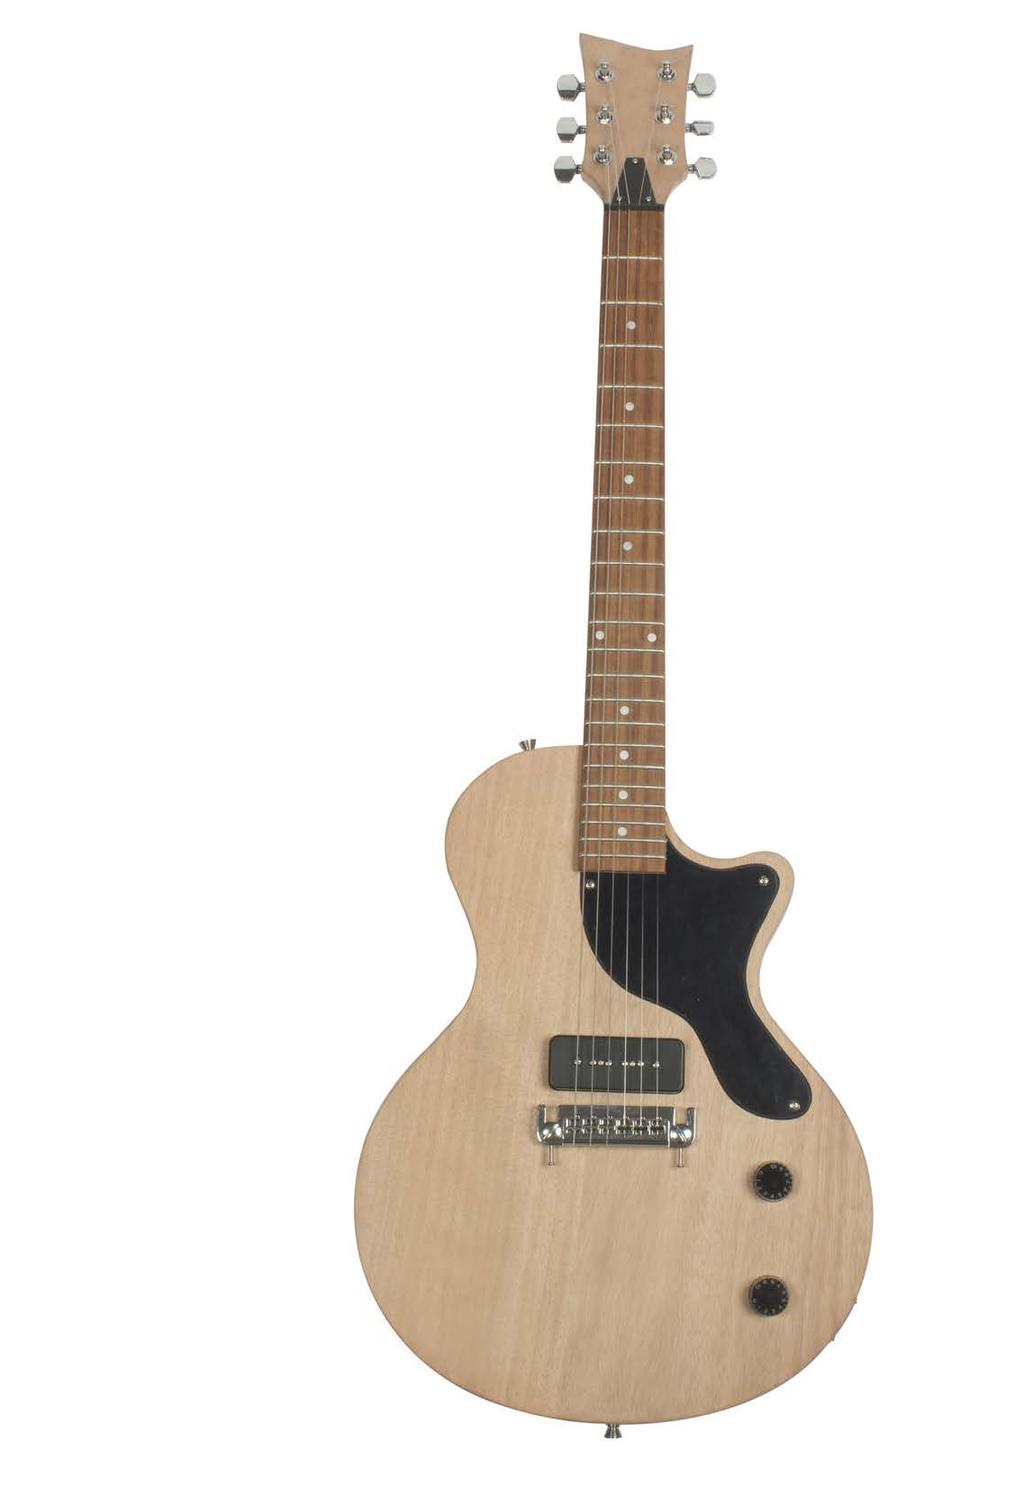 Sheet #i-5203 Updated 10/18 StewMac SINGLE-CUT JR GUITAR KIT Assembly Instructions Welcome to guitar building! If you re a first-time builder, this kit is a great way to start.